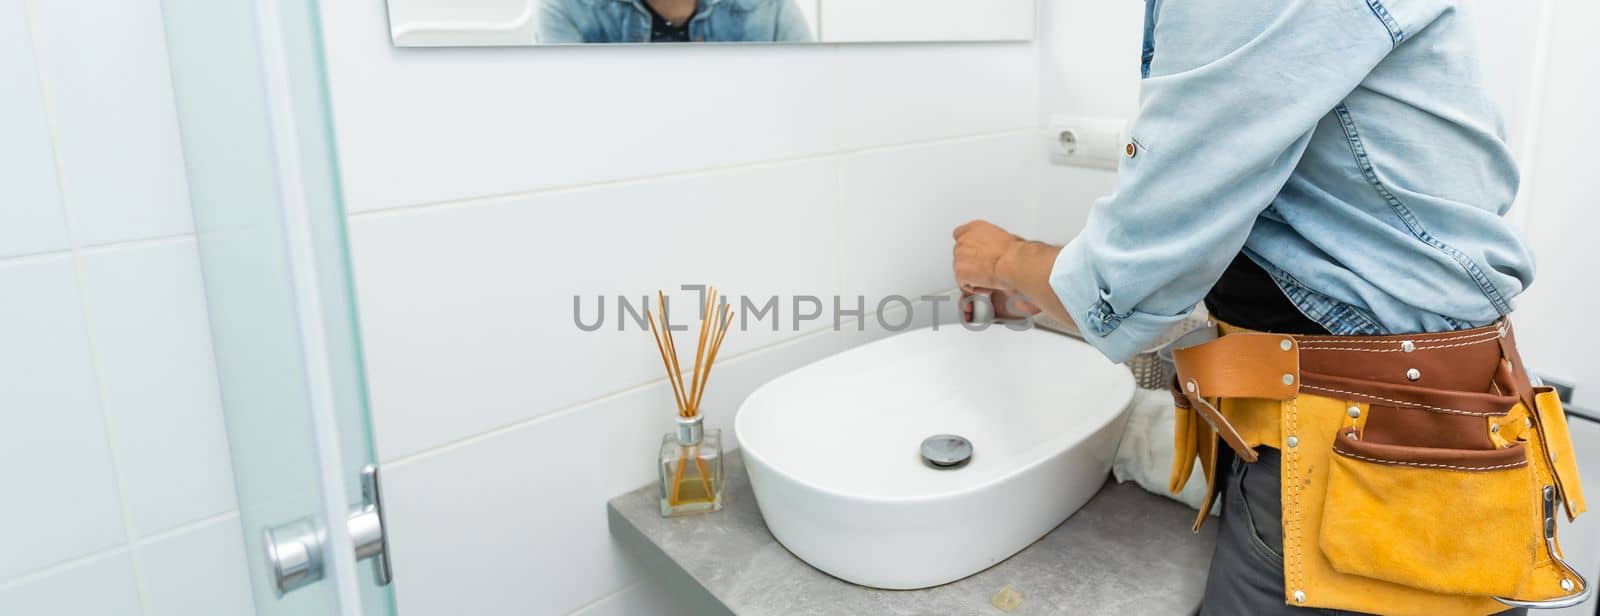 plumber installs a new faucet for a sink.